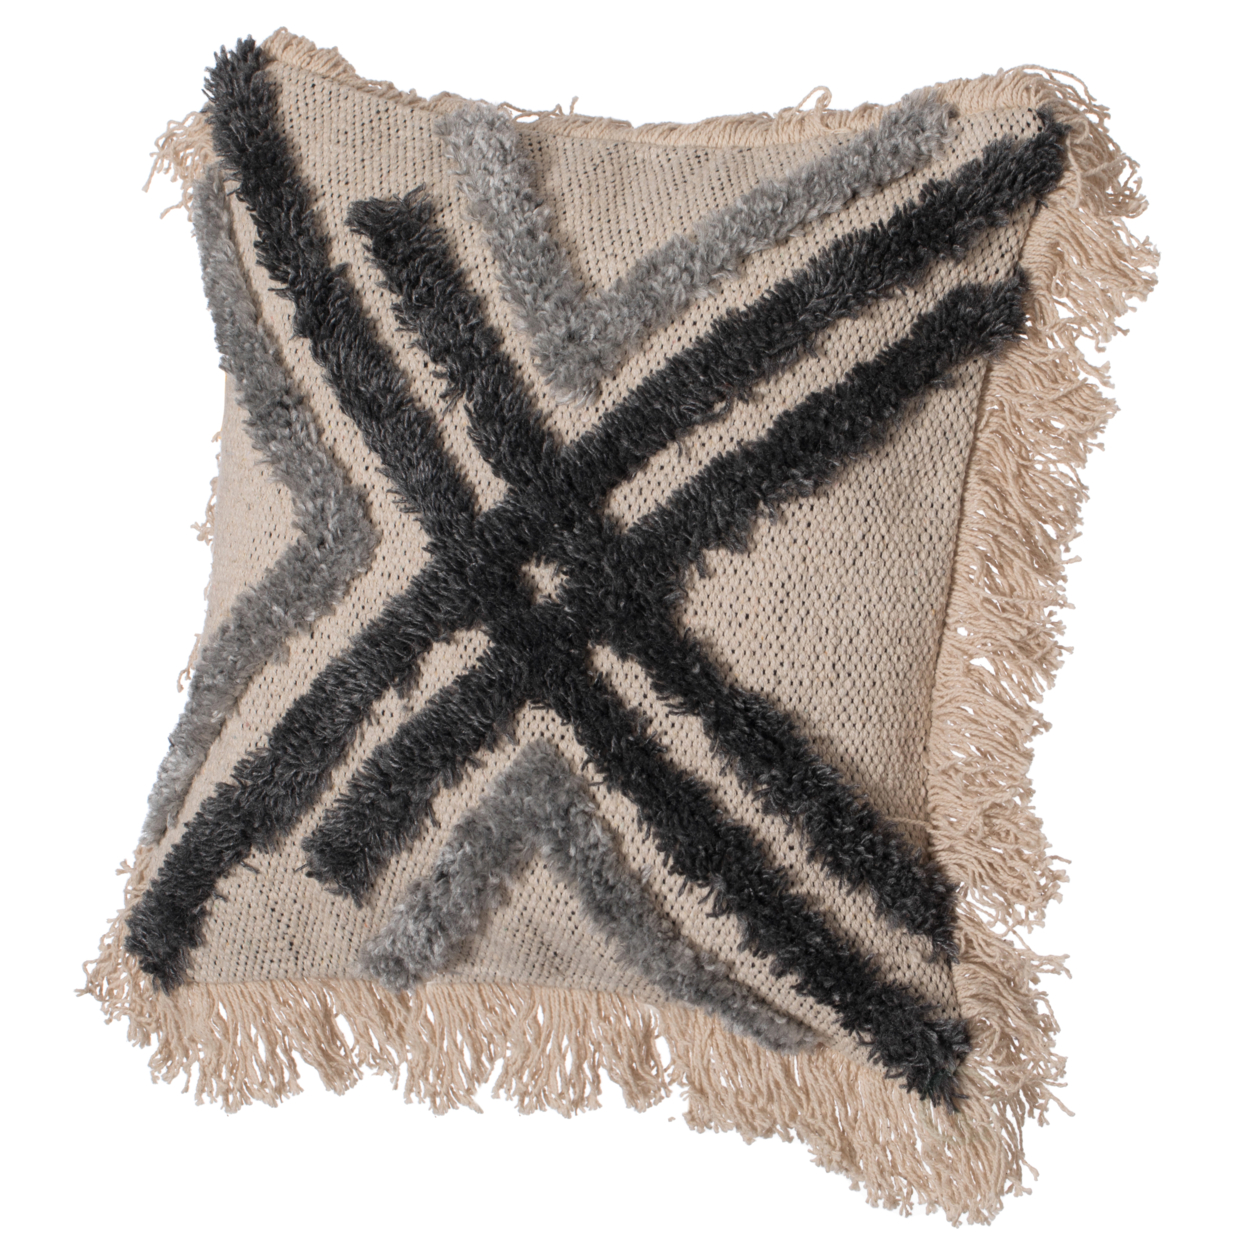 16 Handwoven Cotton & Silk Throw Fringed Pillow Cover Embossed Zig Zag & Crossed Lines Design - Crossed